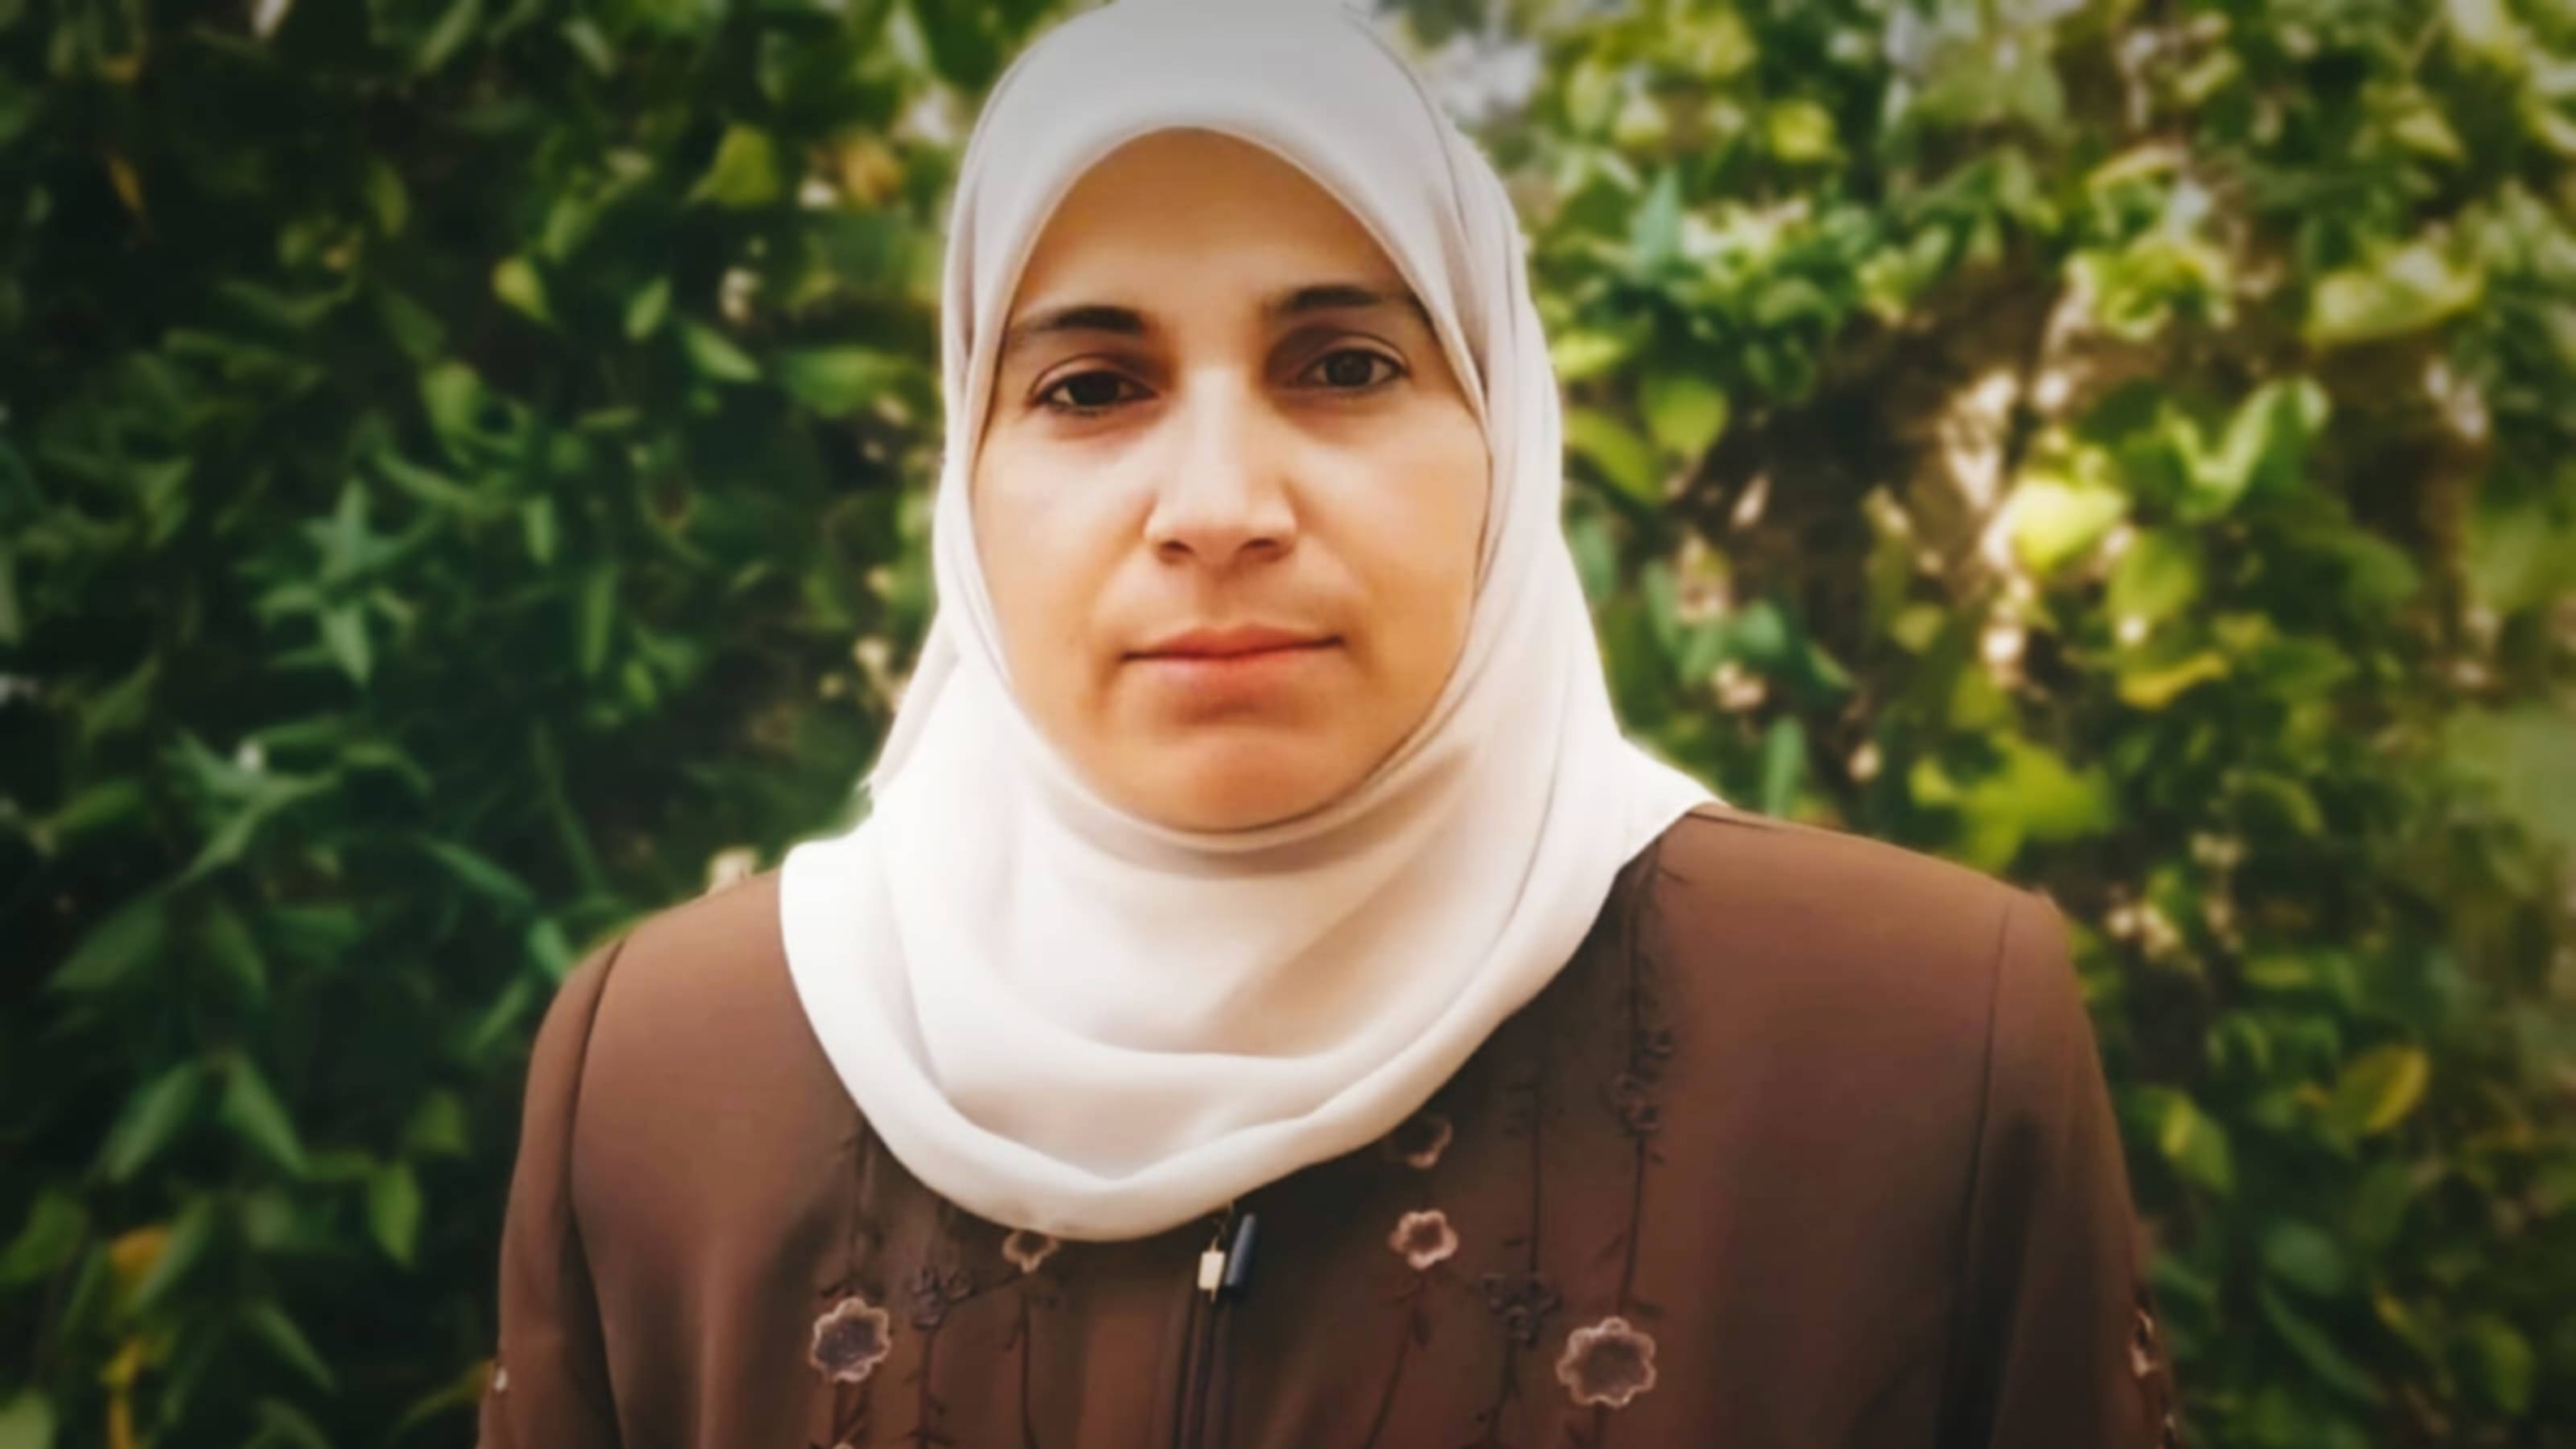 Writer Lama Khater was arrest after Israeli forces stormed her home in Hebron city on 26 October (X)